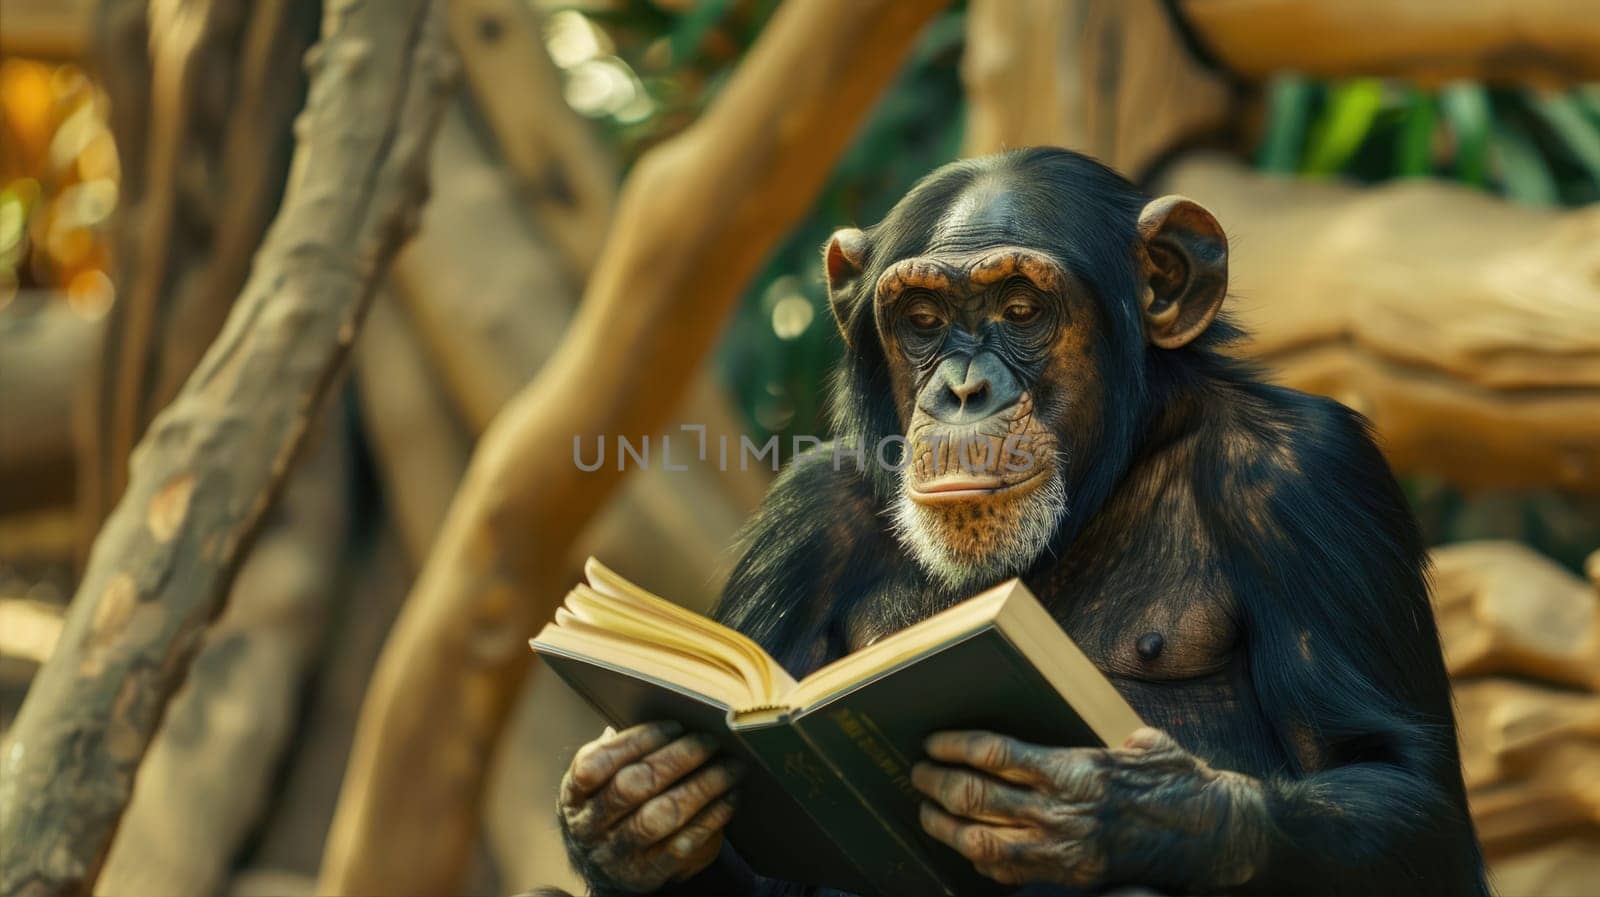 Monkey reading a book. Developed and intelligent monkey by natali_brill